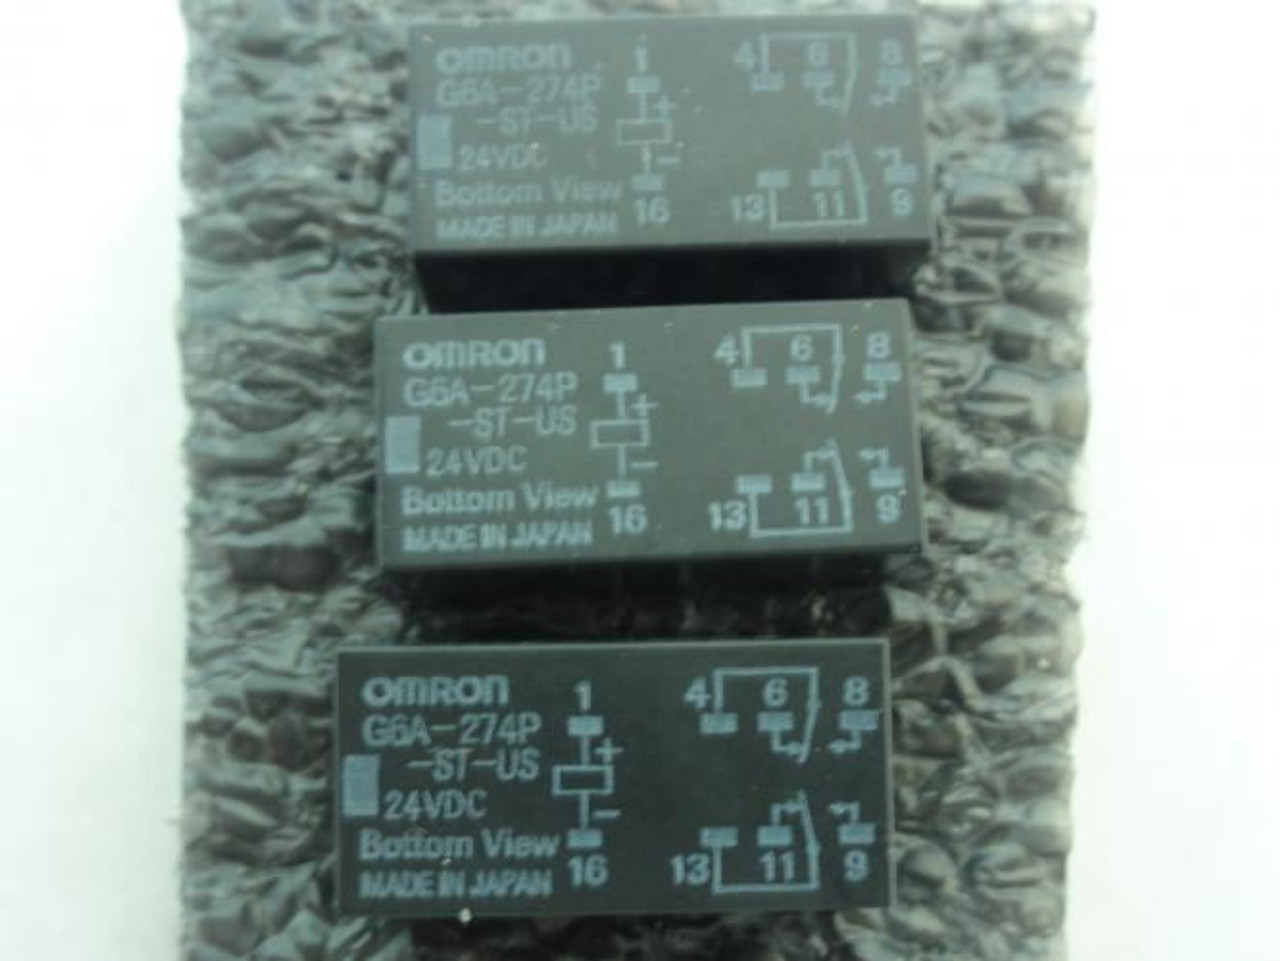 Omron G6A-274P-ST-US-DC24; Lot-3 Low Signal Relays; 24VDC